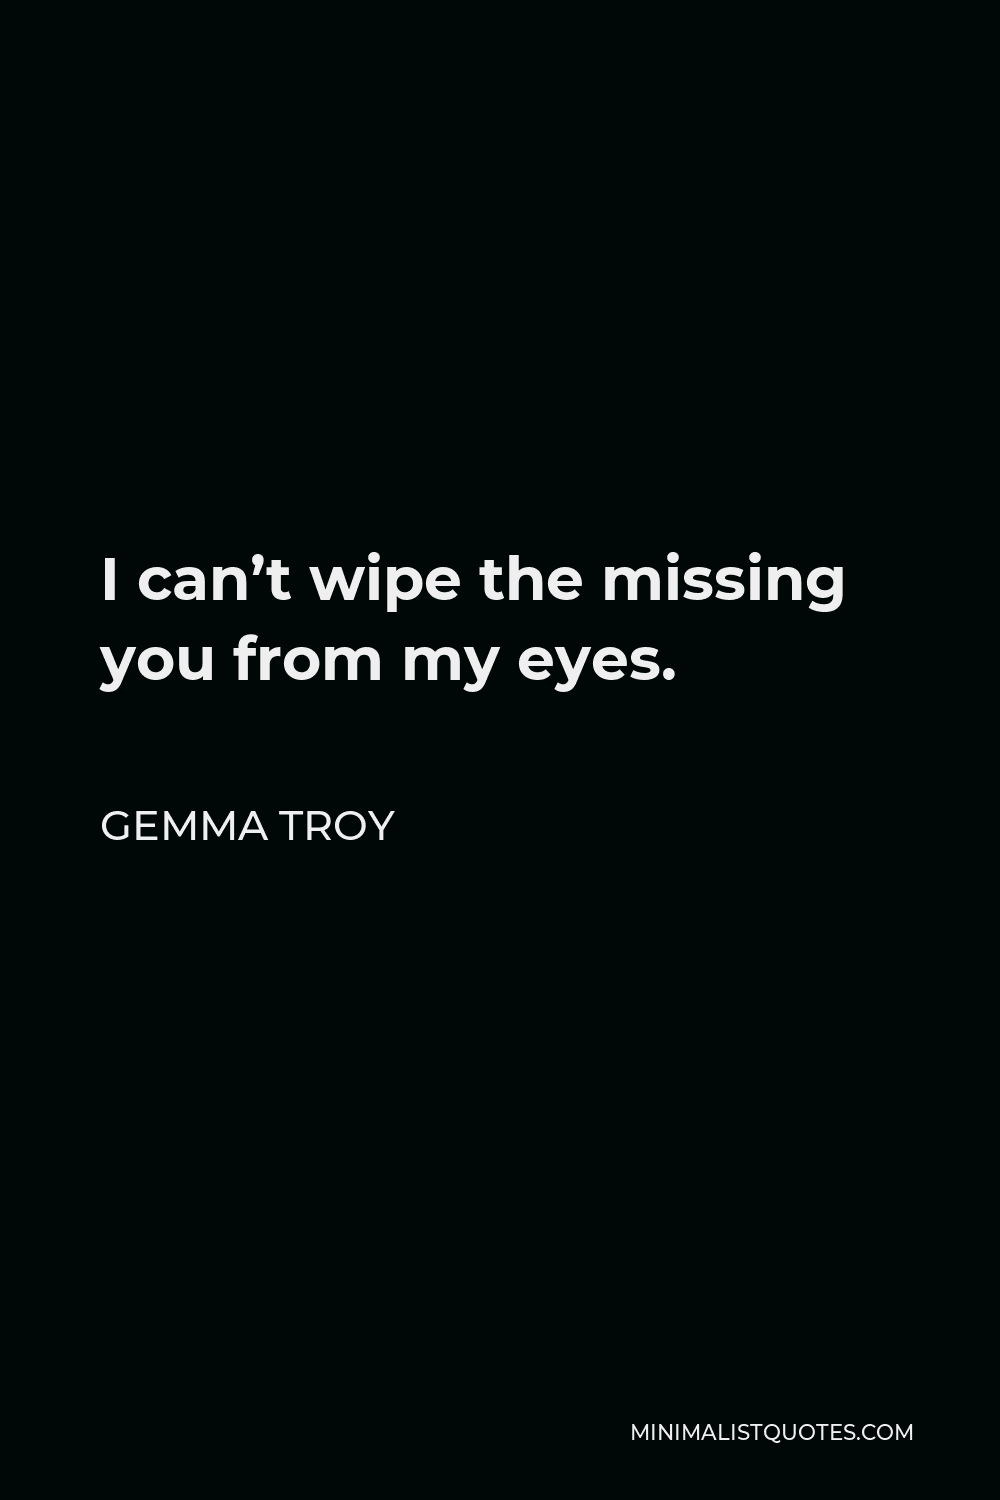 Gemma Troy Quote - I can’t wipe the missing you from my eyes.